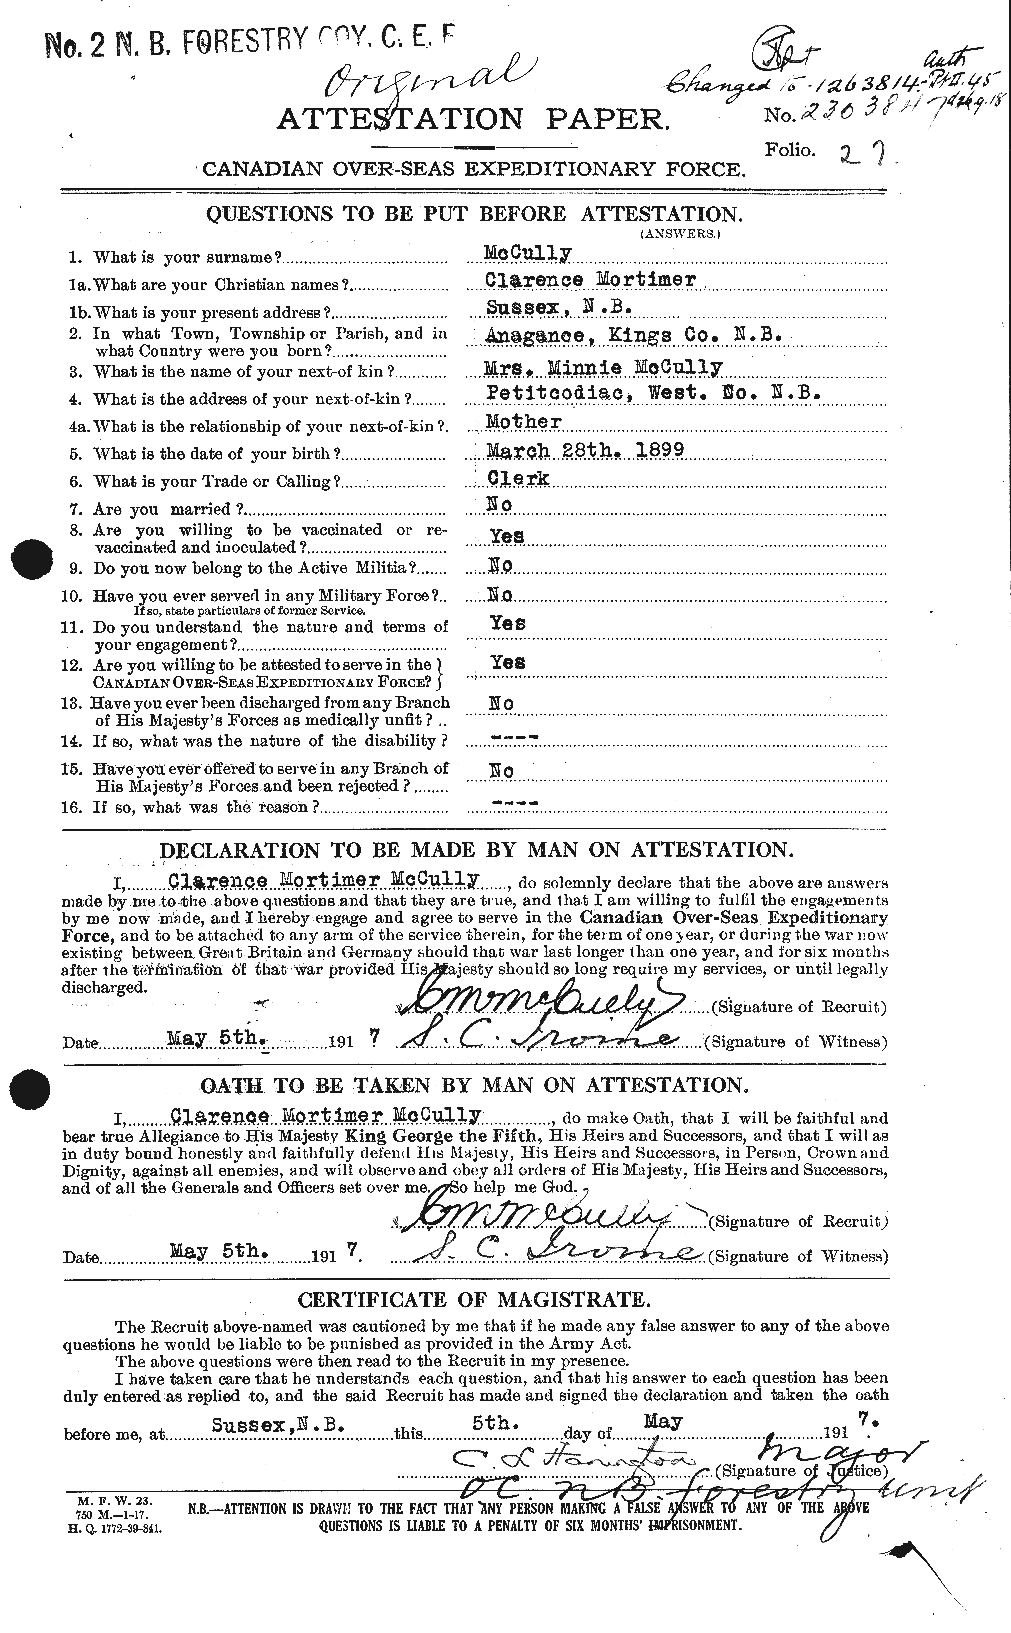 Personnel Records of the First World War - CEF 136830a